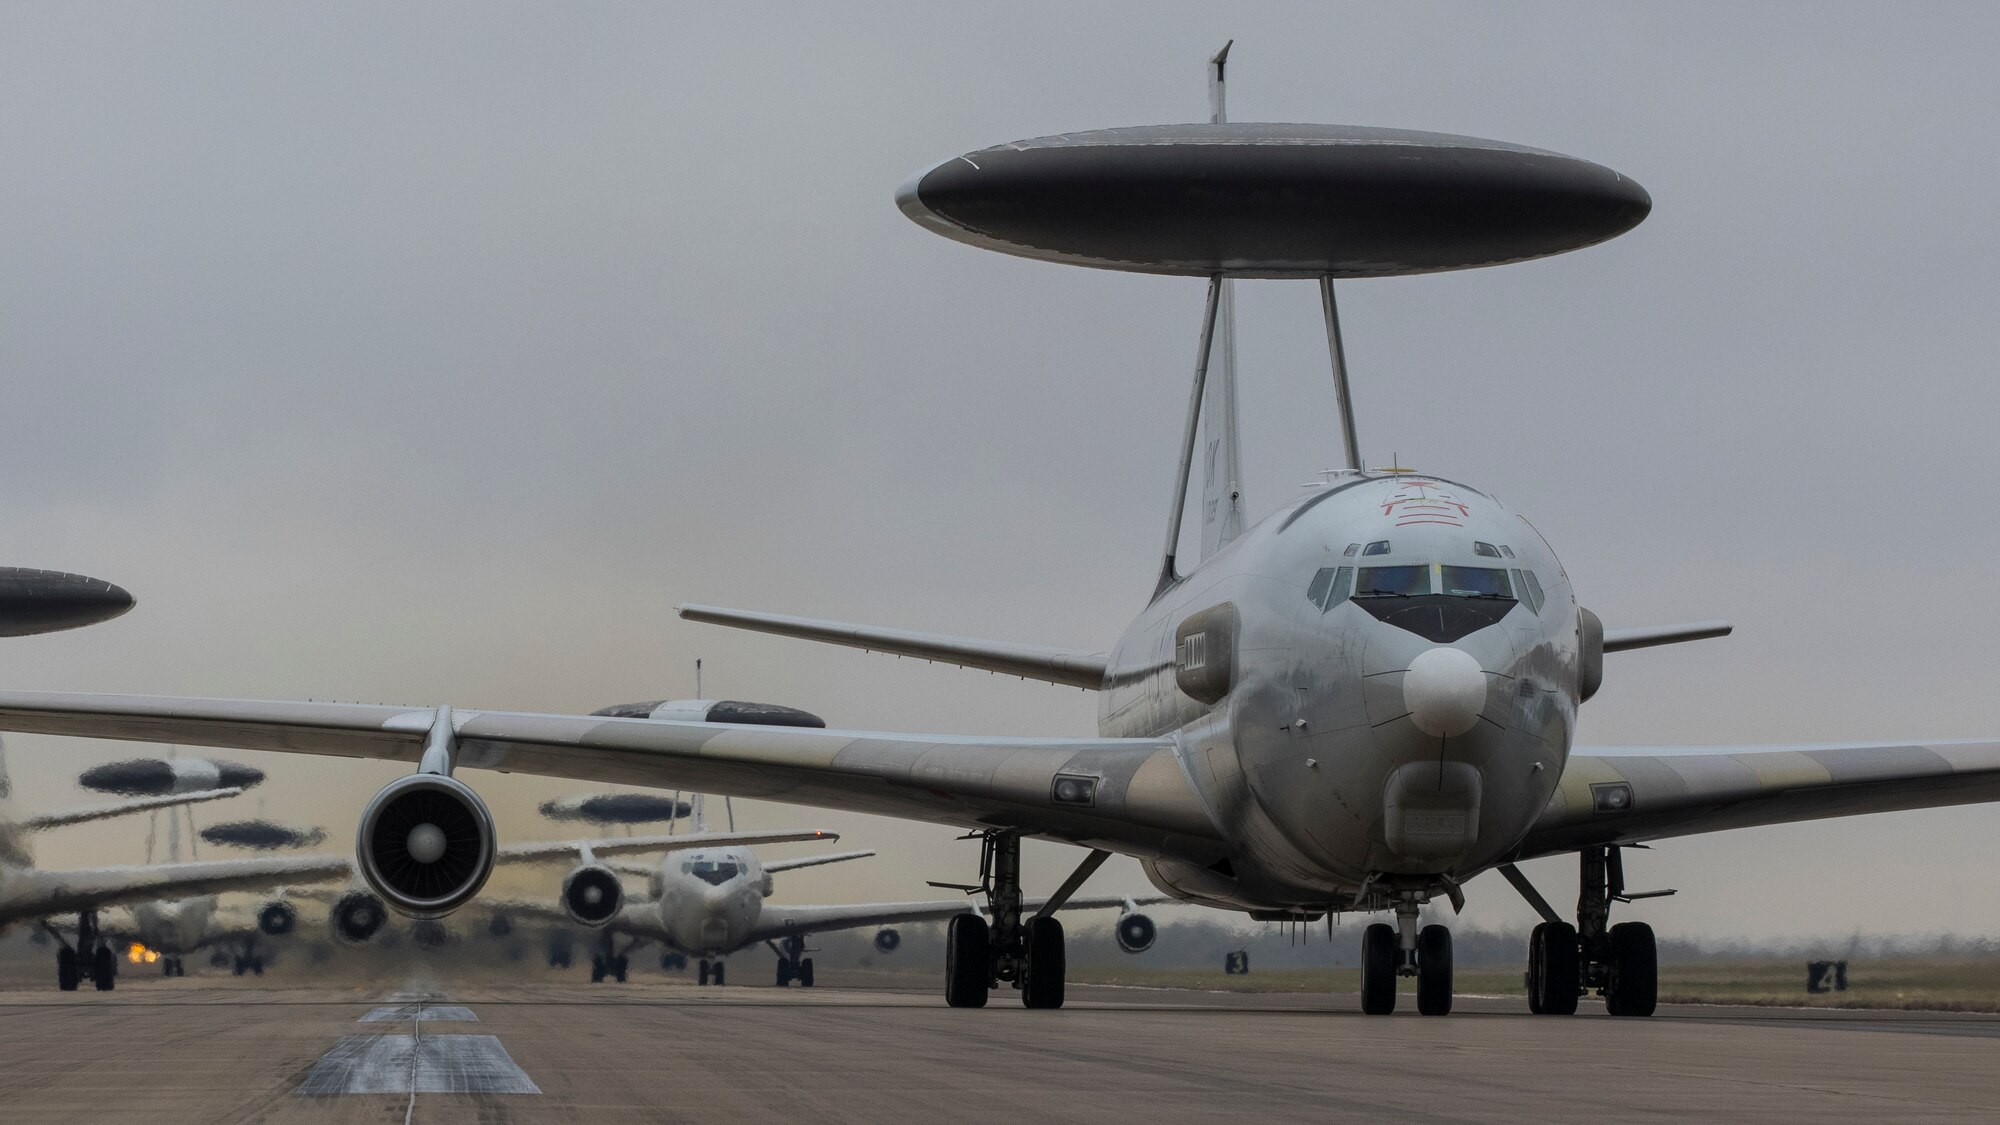 E-3 Sentry aircraft lined up on the runway.